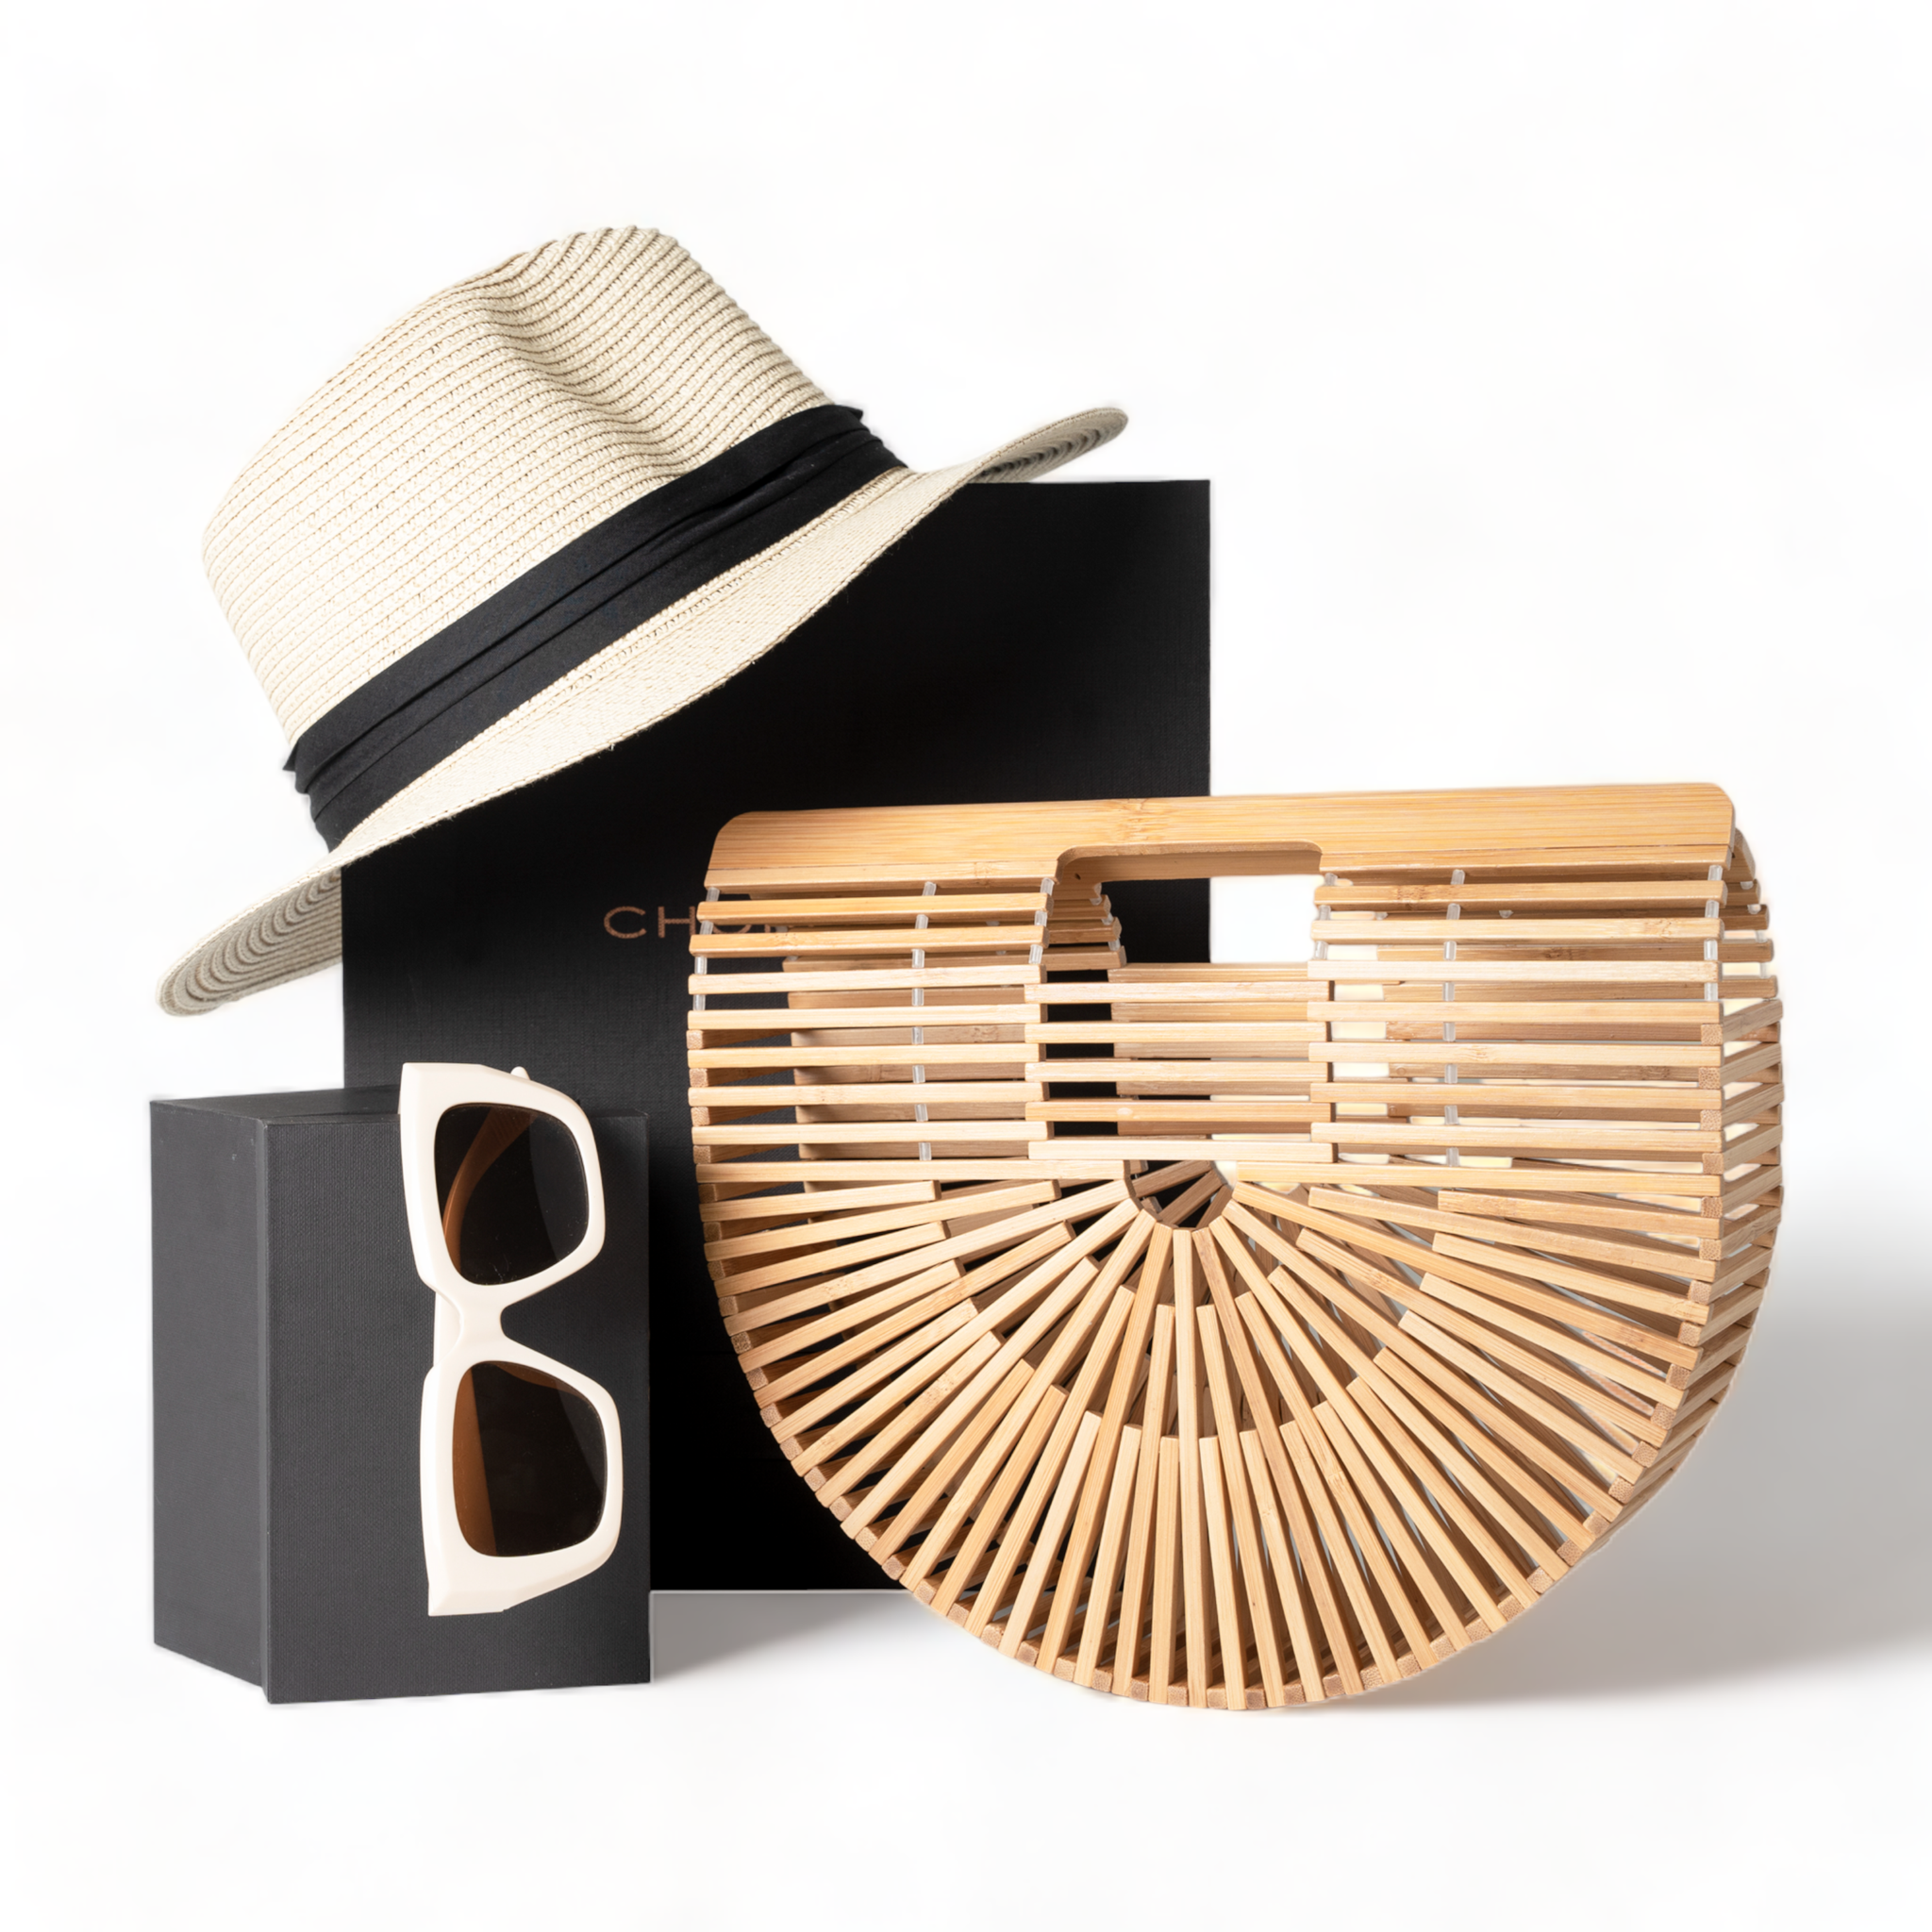 Chokore Special 3-in-1 Gift Set for Him & Her (Straw Hat, Bamboo Bag, & Sunglasses)